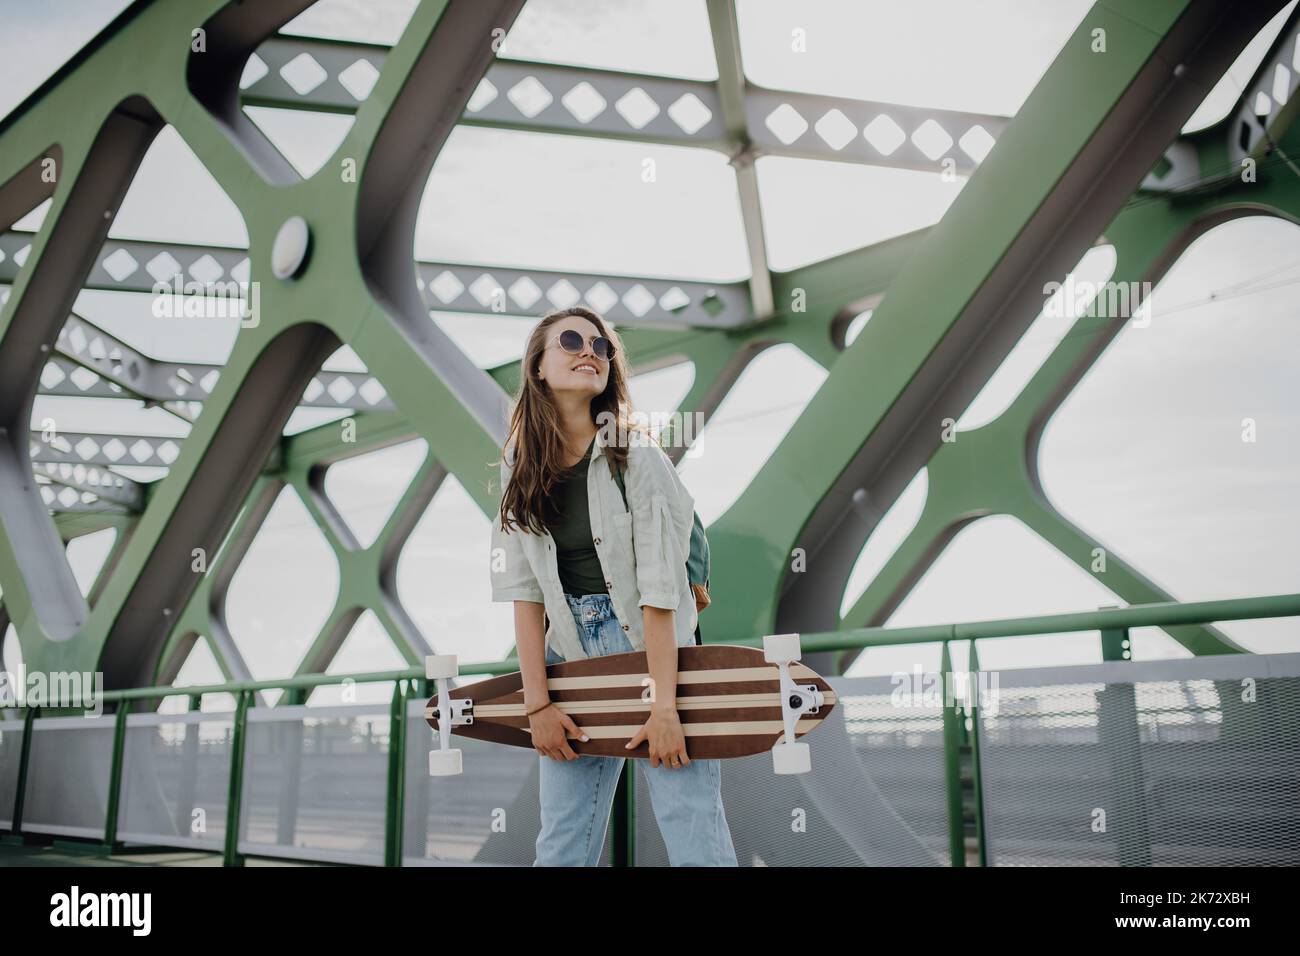 Young woman walking on city bridge with skateboard. Youth culture and commuting concept. Stock Photo